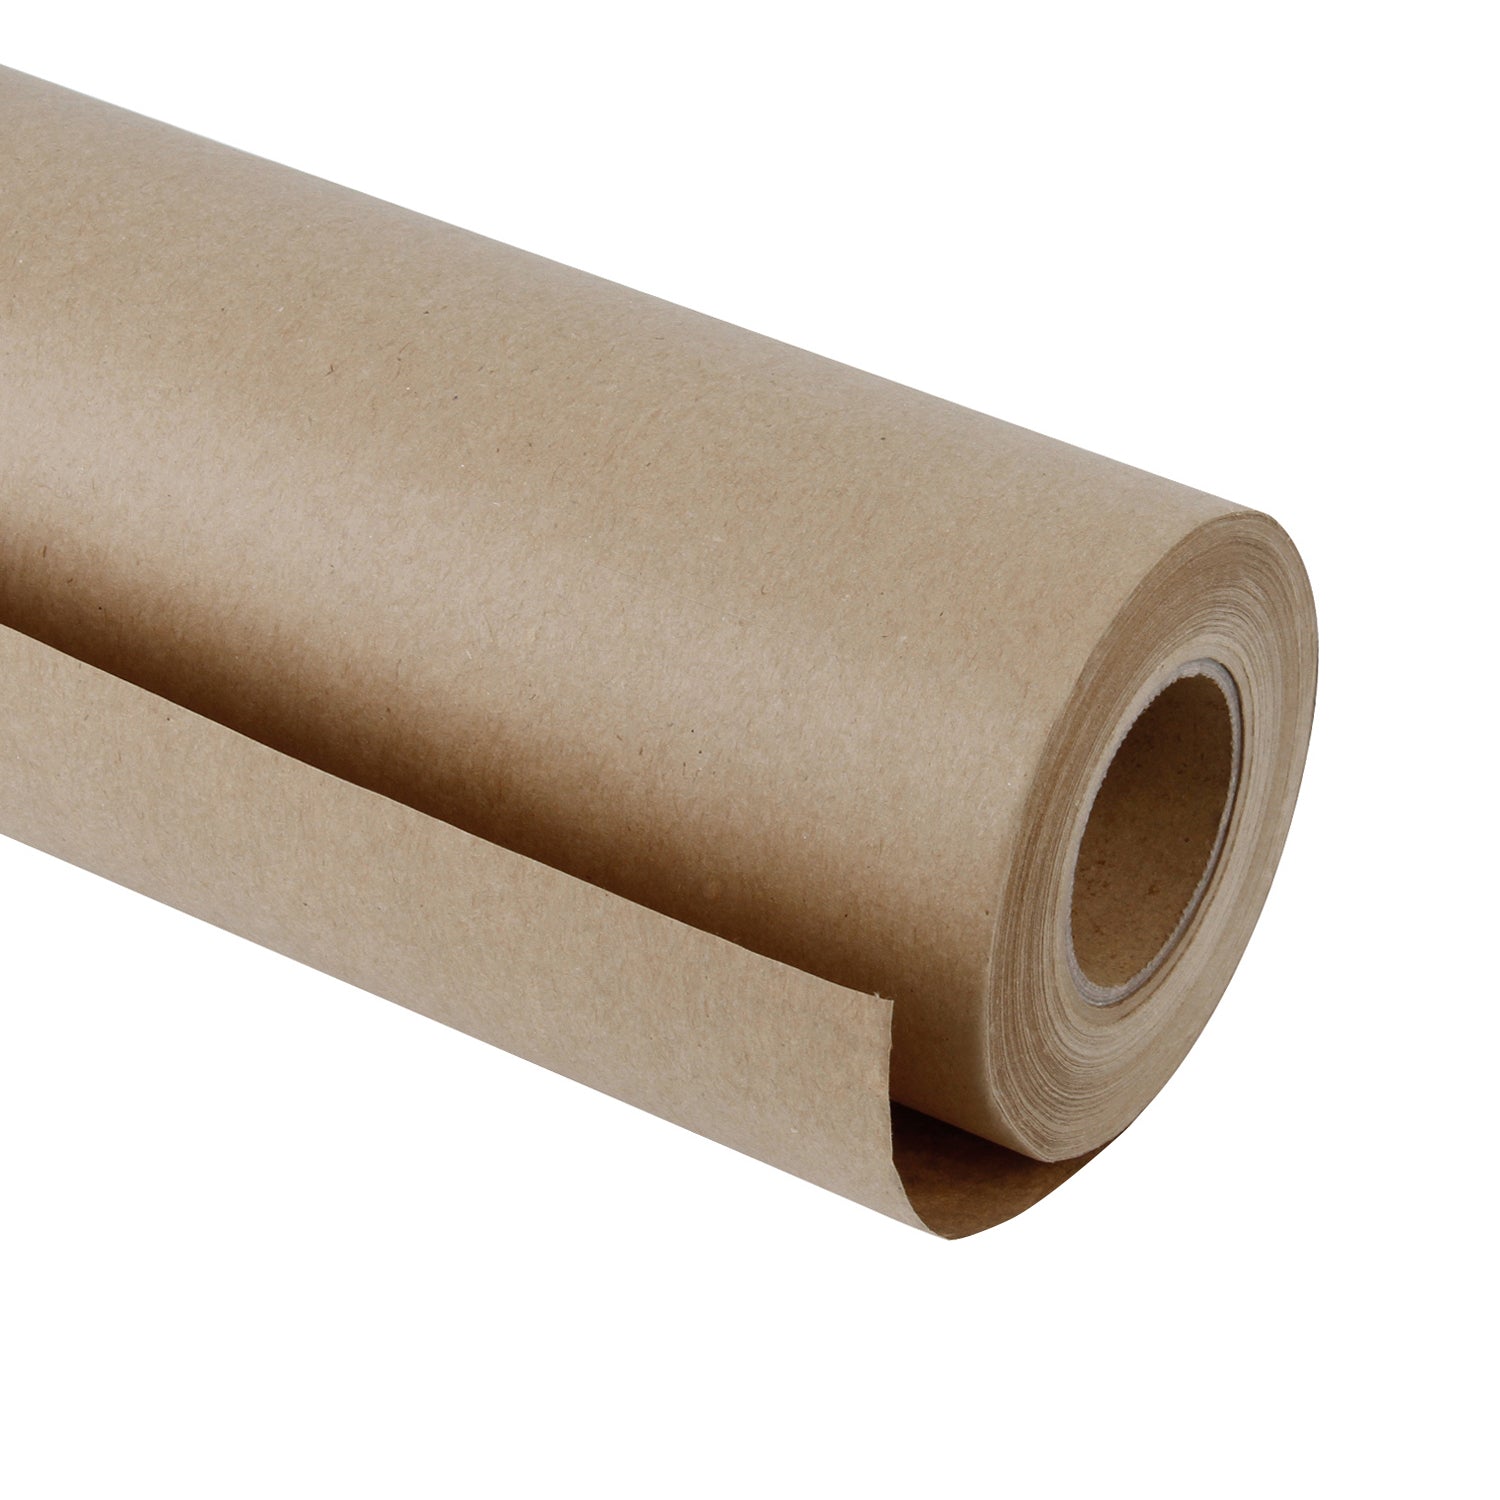 Mm Will Care 5m 36 Inch Brown Paper Roll Mmwill1177 at Rs 278.0